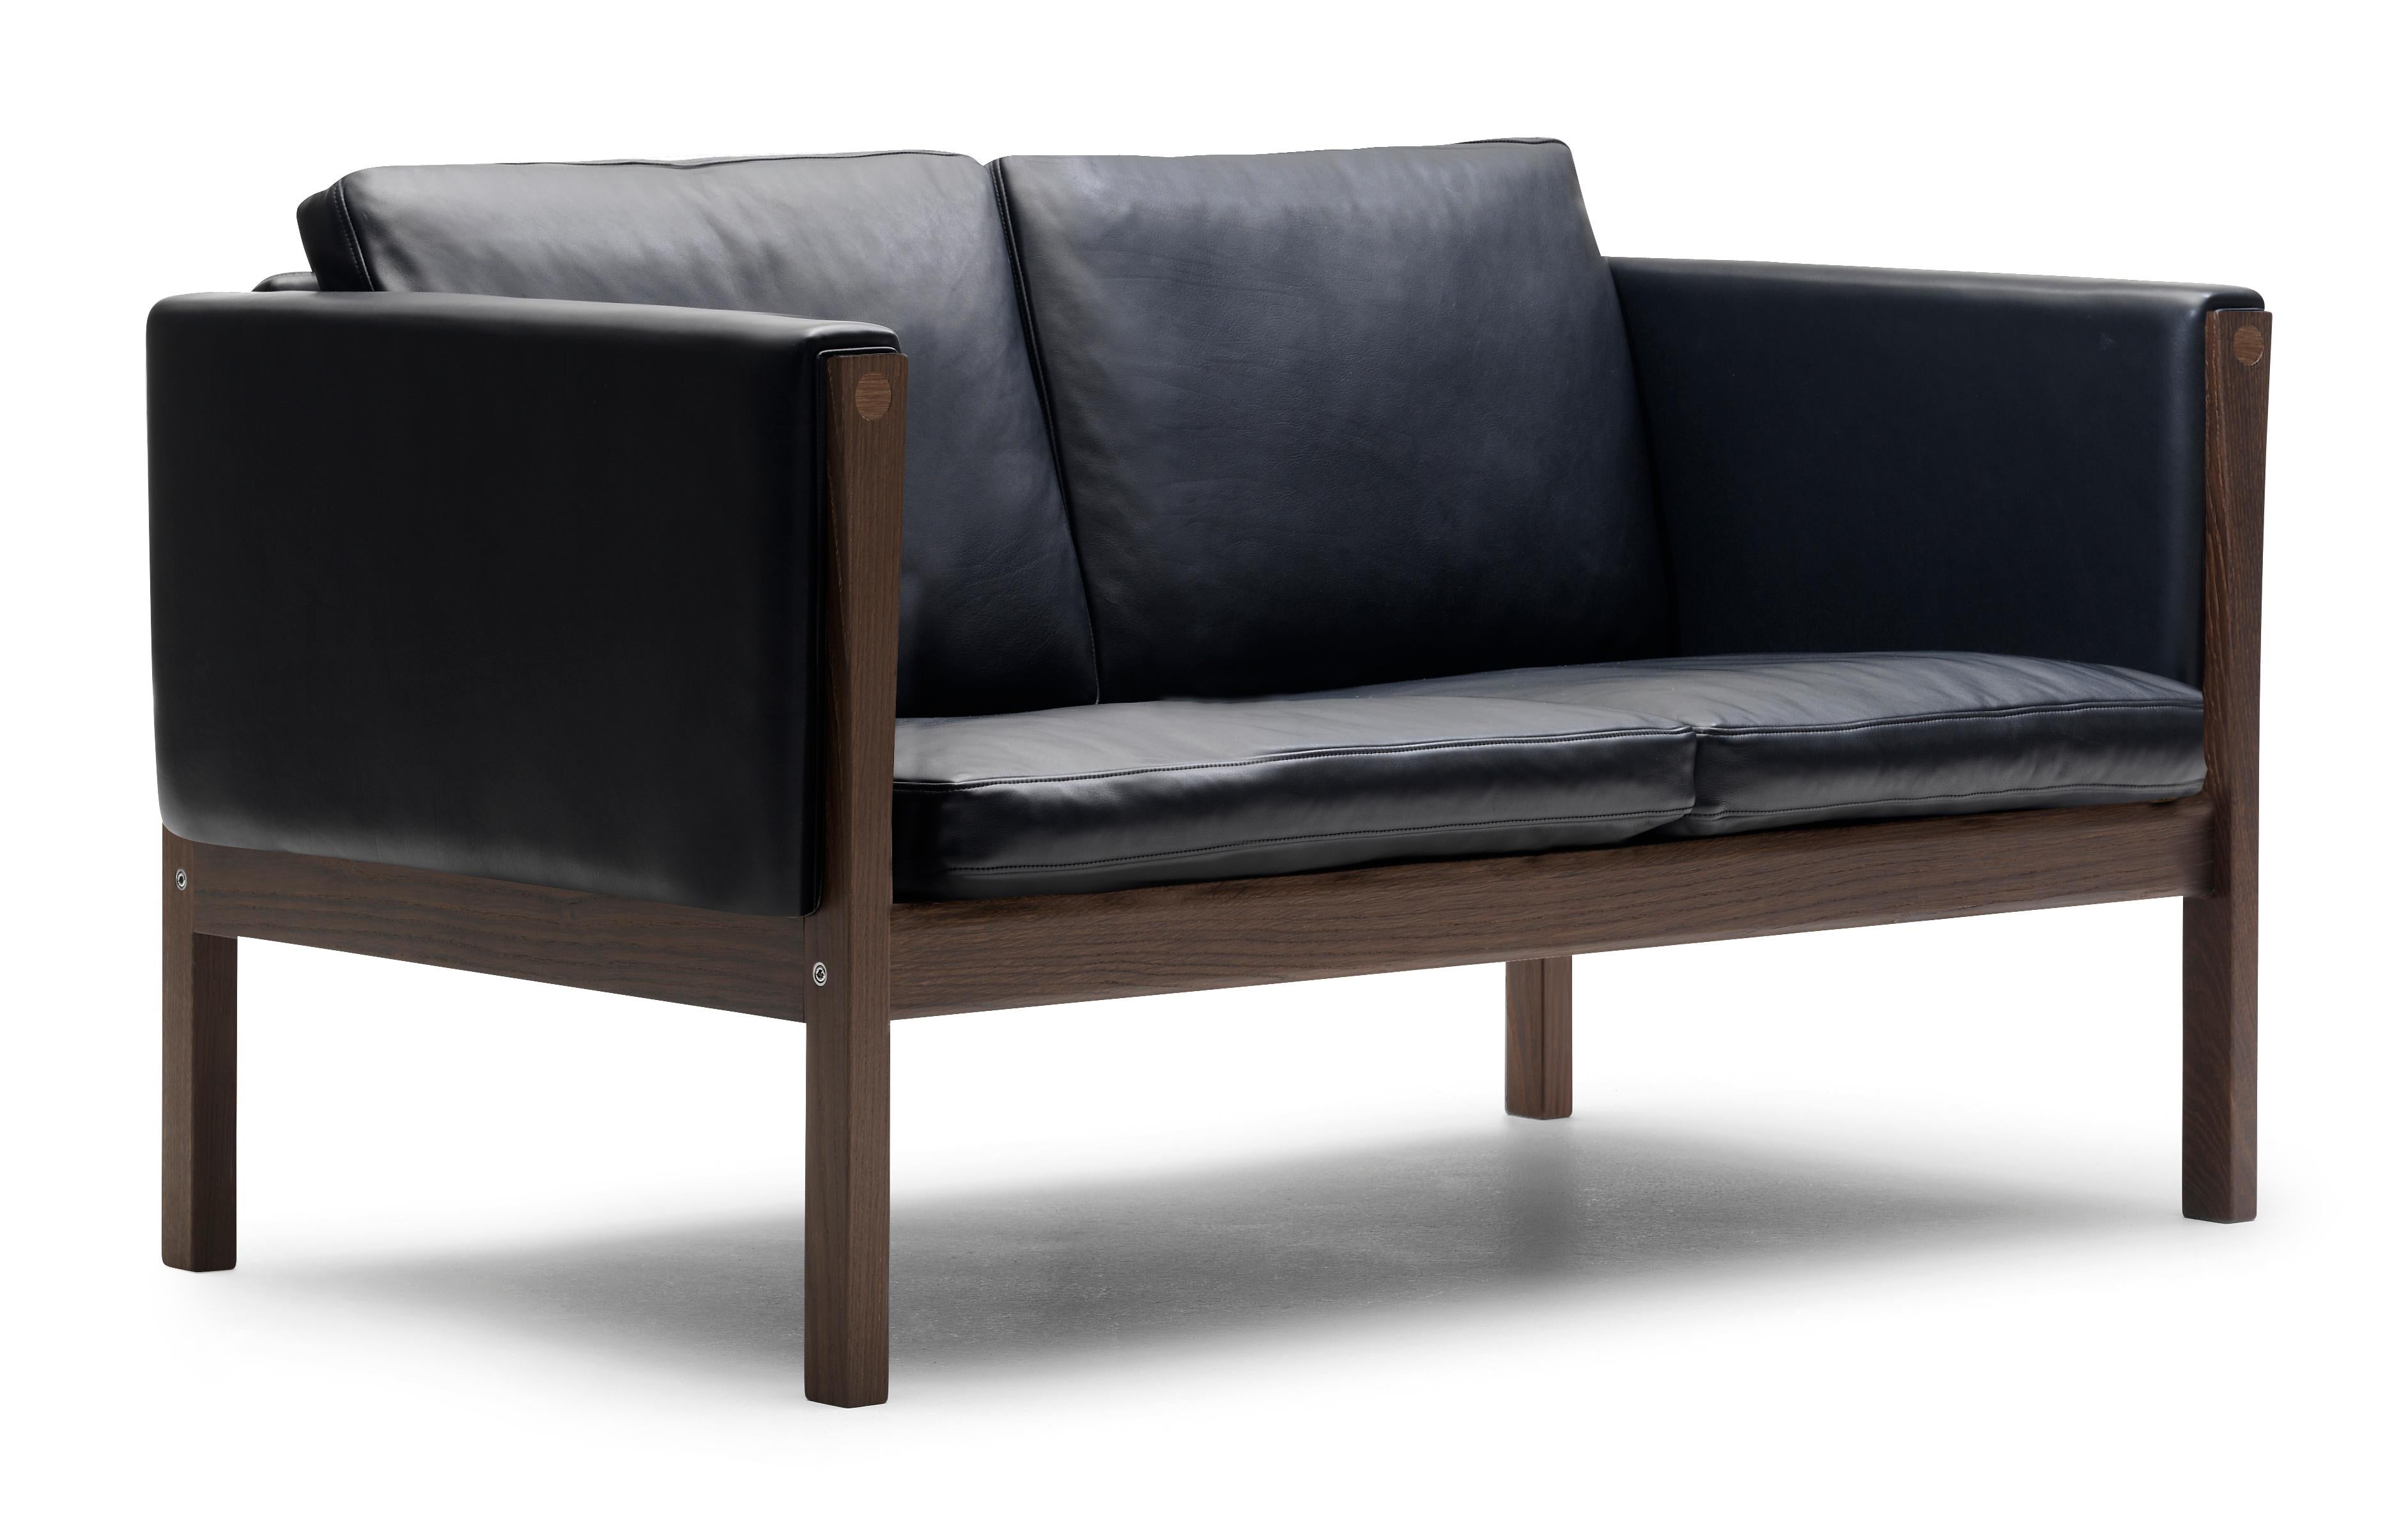 Black (Sif 98) CH162 Sofa in Walnut Oil Frame with Leather Upholstery by Hans J. Wegner 2